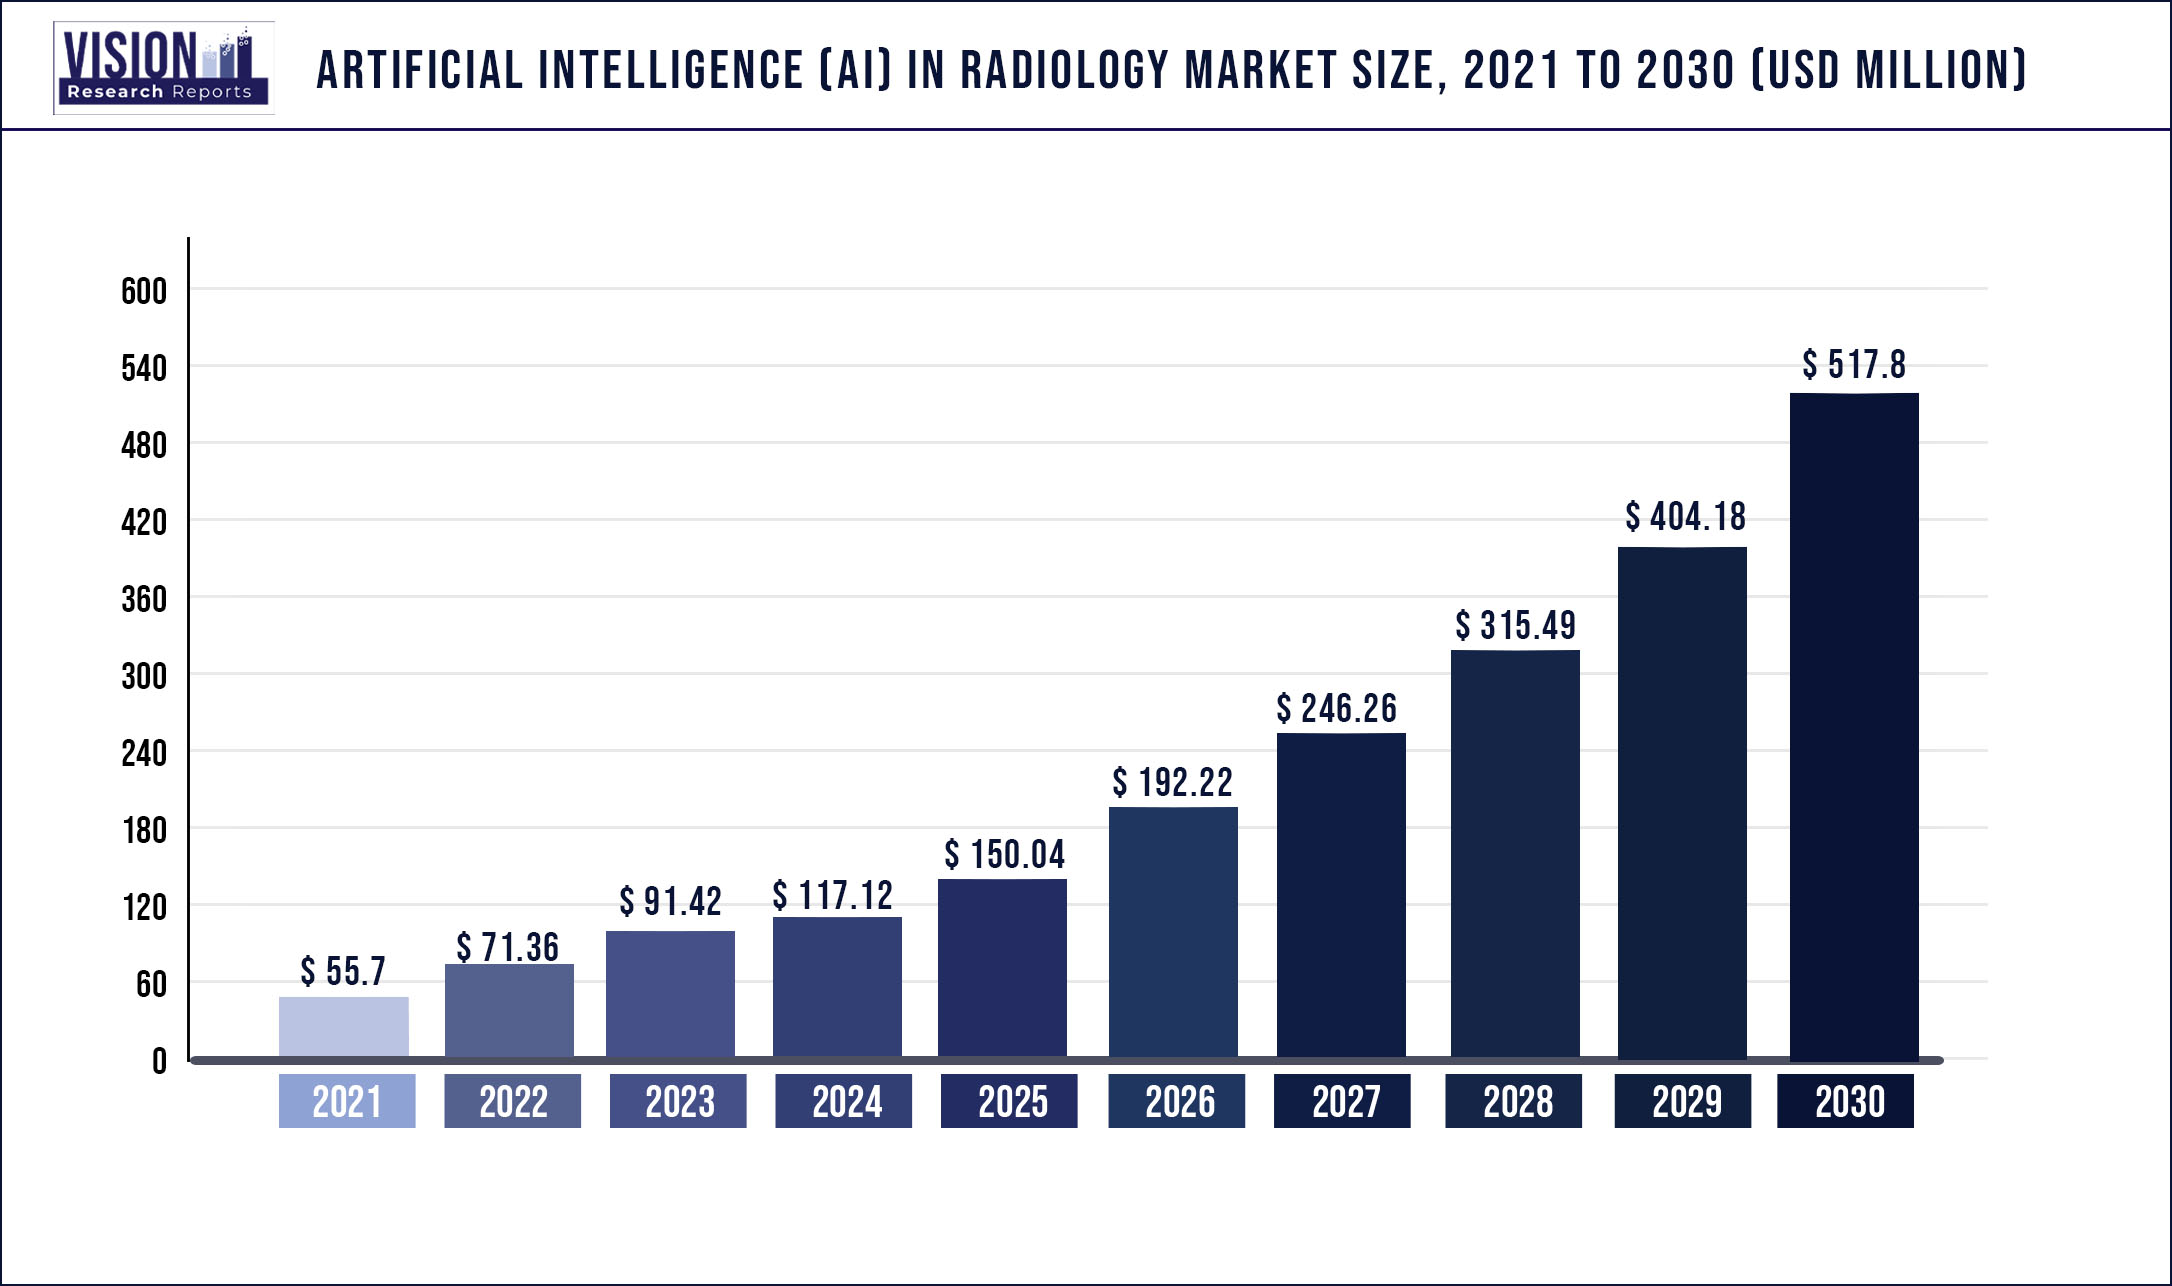 Artificial Intelligence (AI) in Radiology Market Size 2021 to 2030